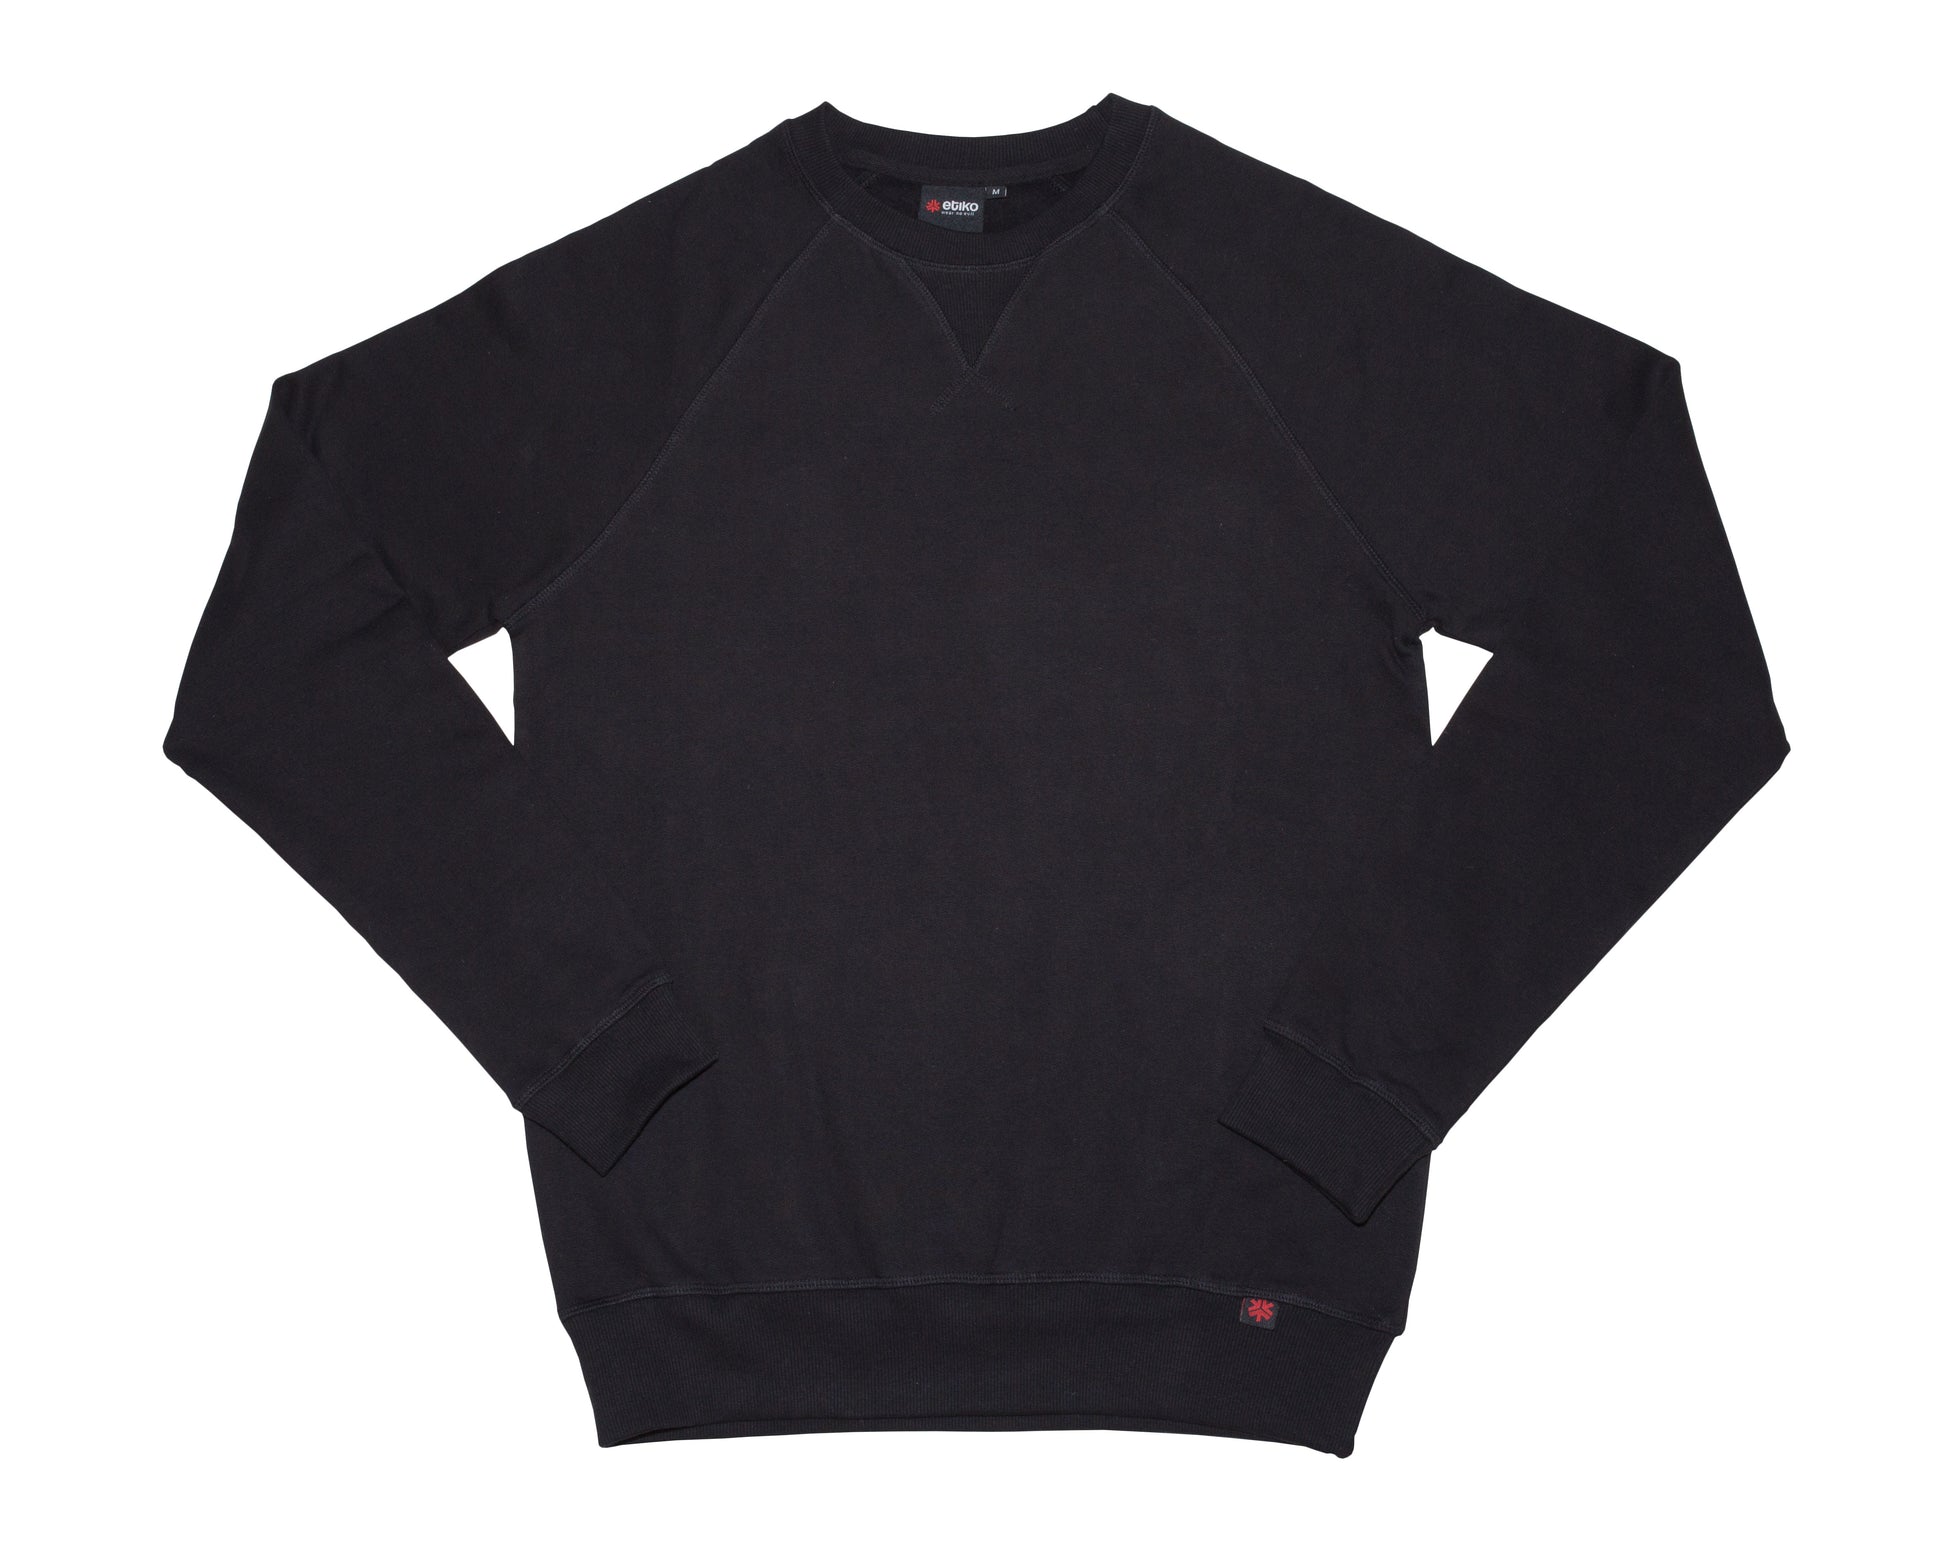 Etiko black organic cotton crew neck top with long sleeves, ethically made, certified organic